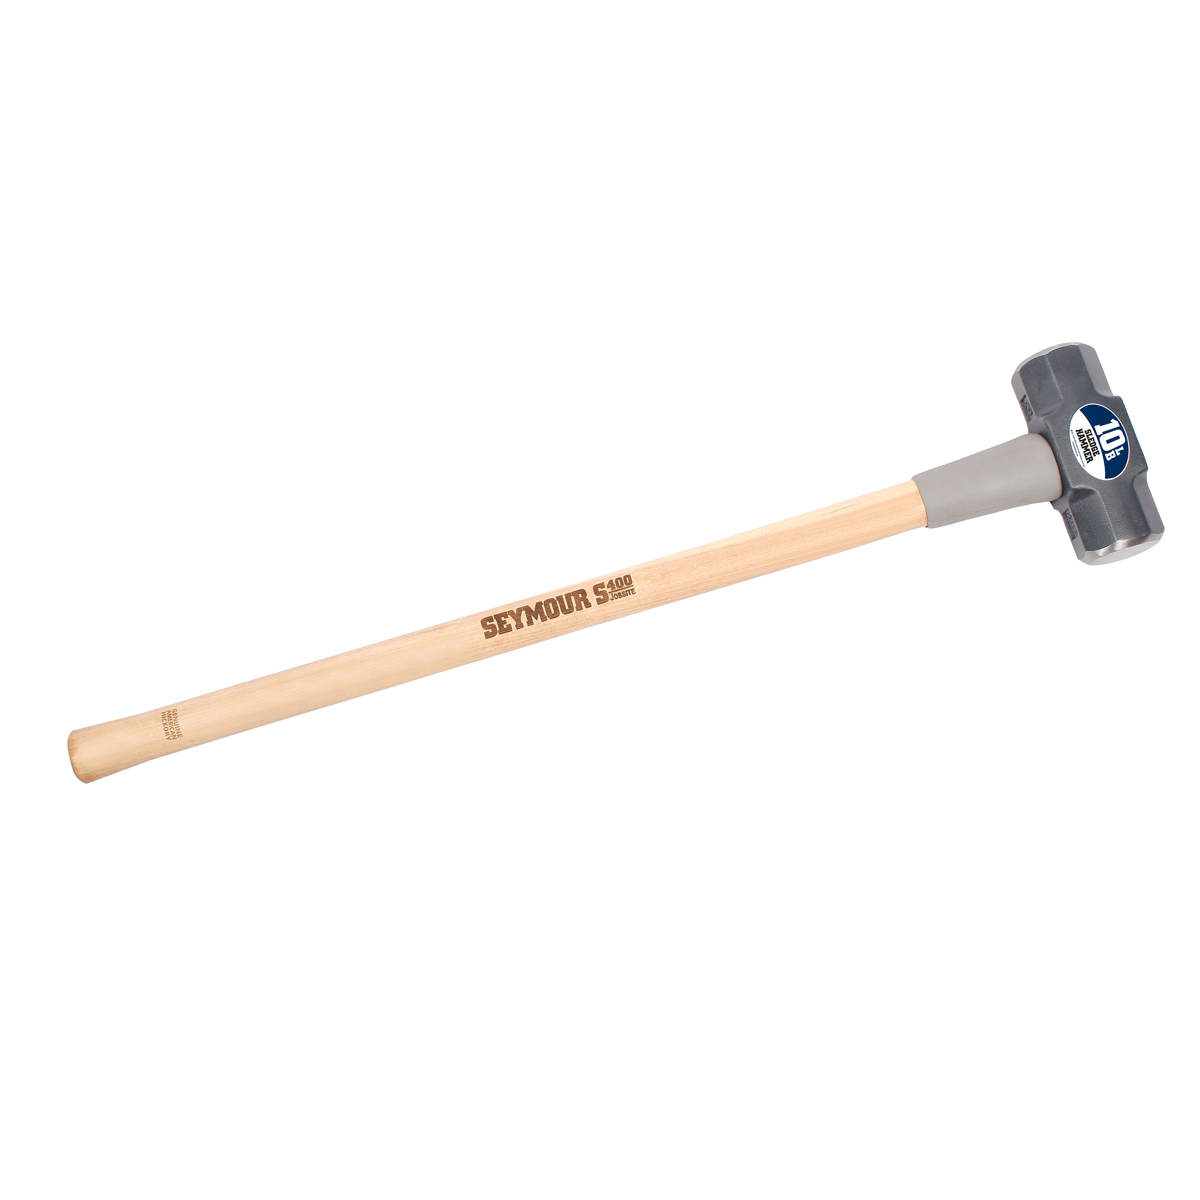 lb Hammer with 36" Hickory Handle